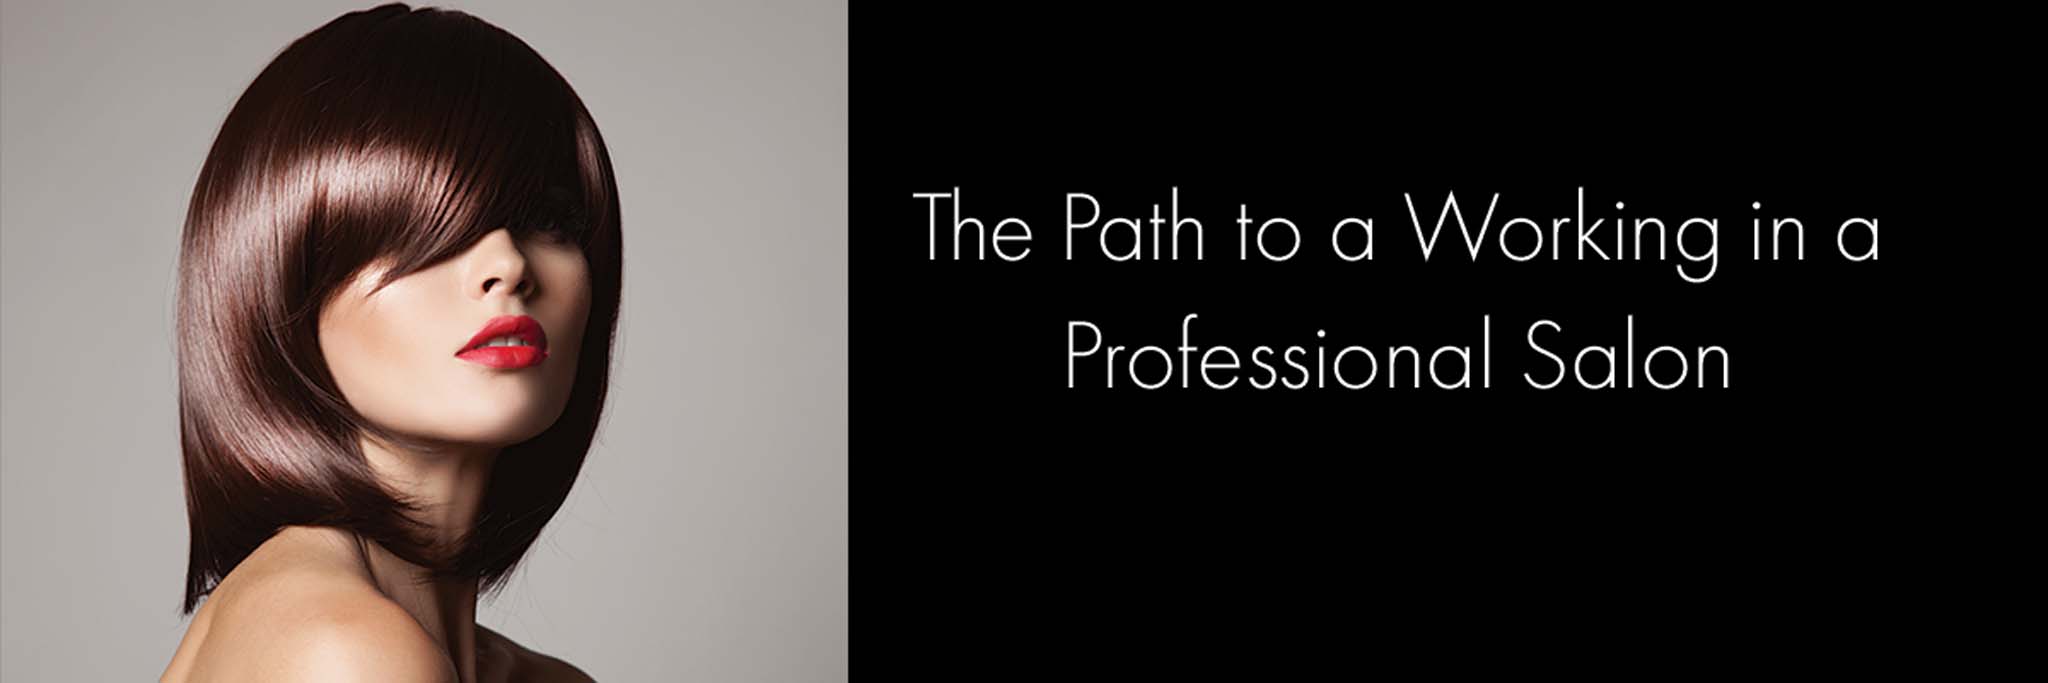 the path to working in a professional salon